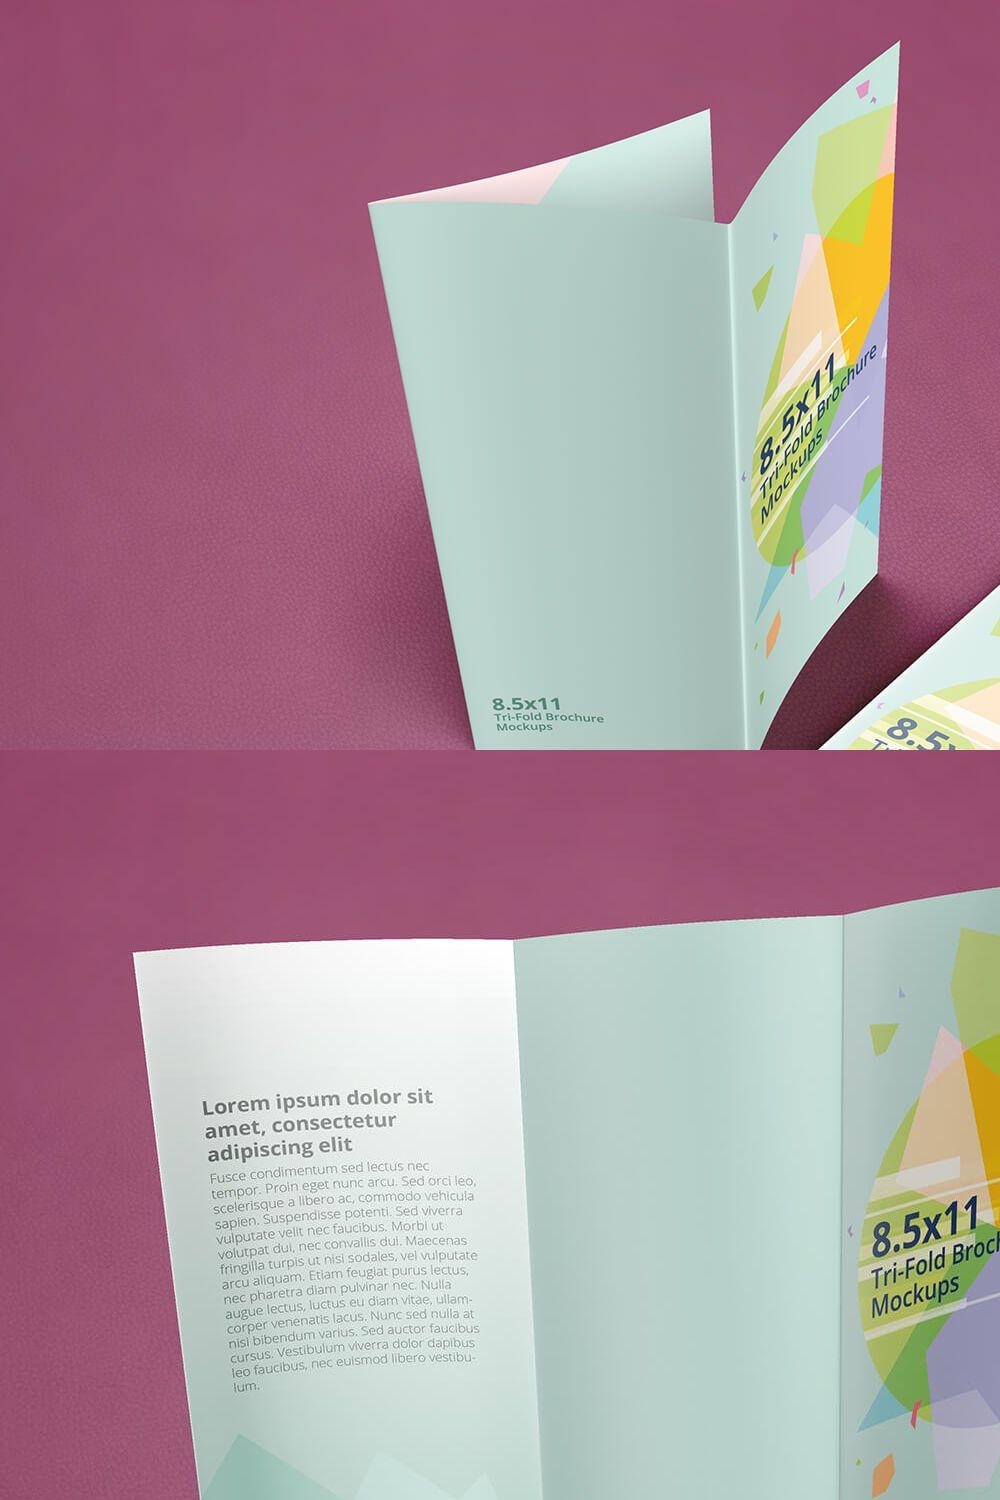 Trifold Brochure Mockups 8.5x11 pinterest preview image.